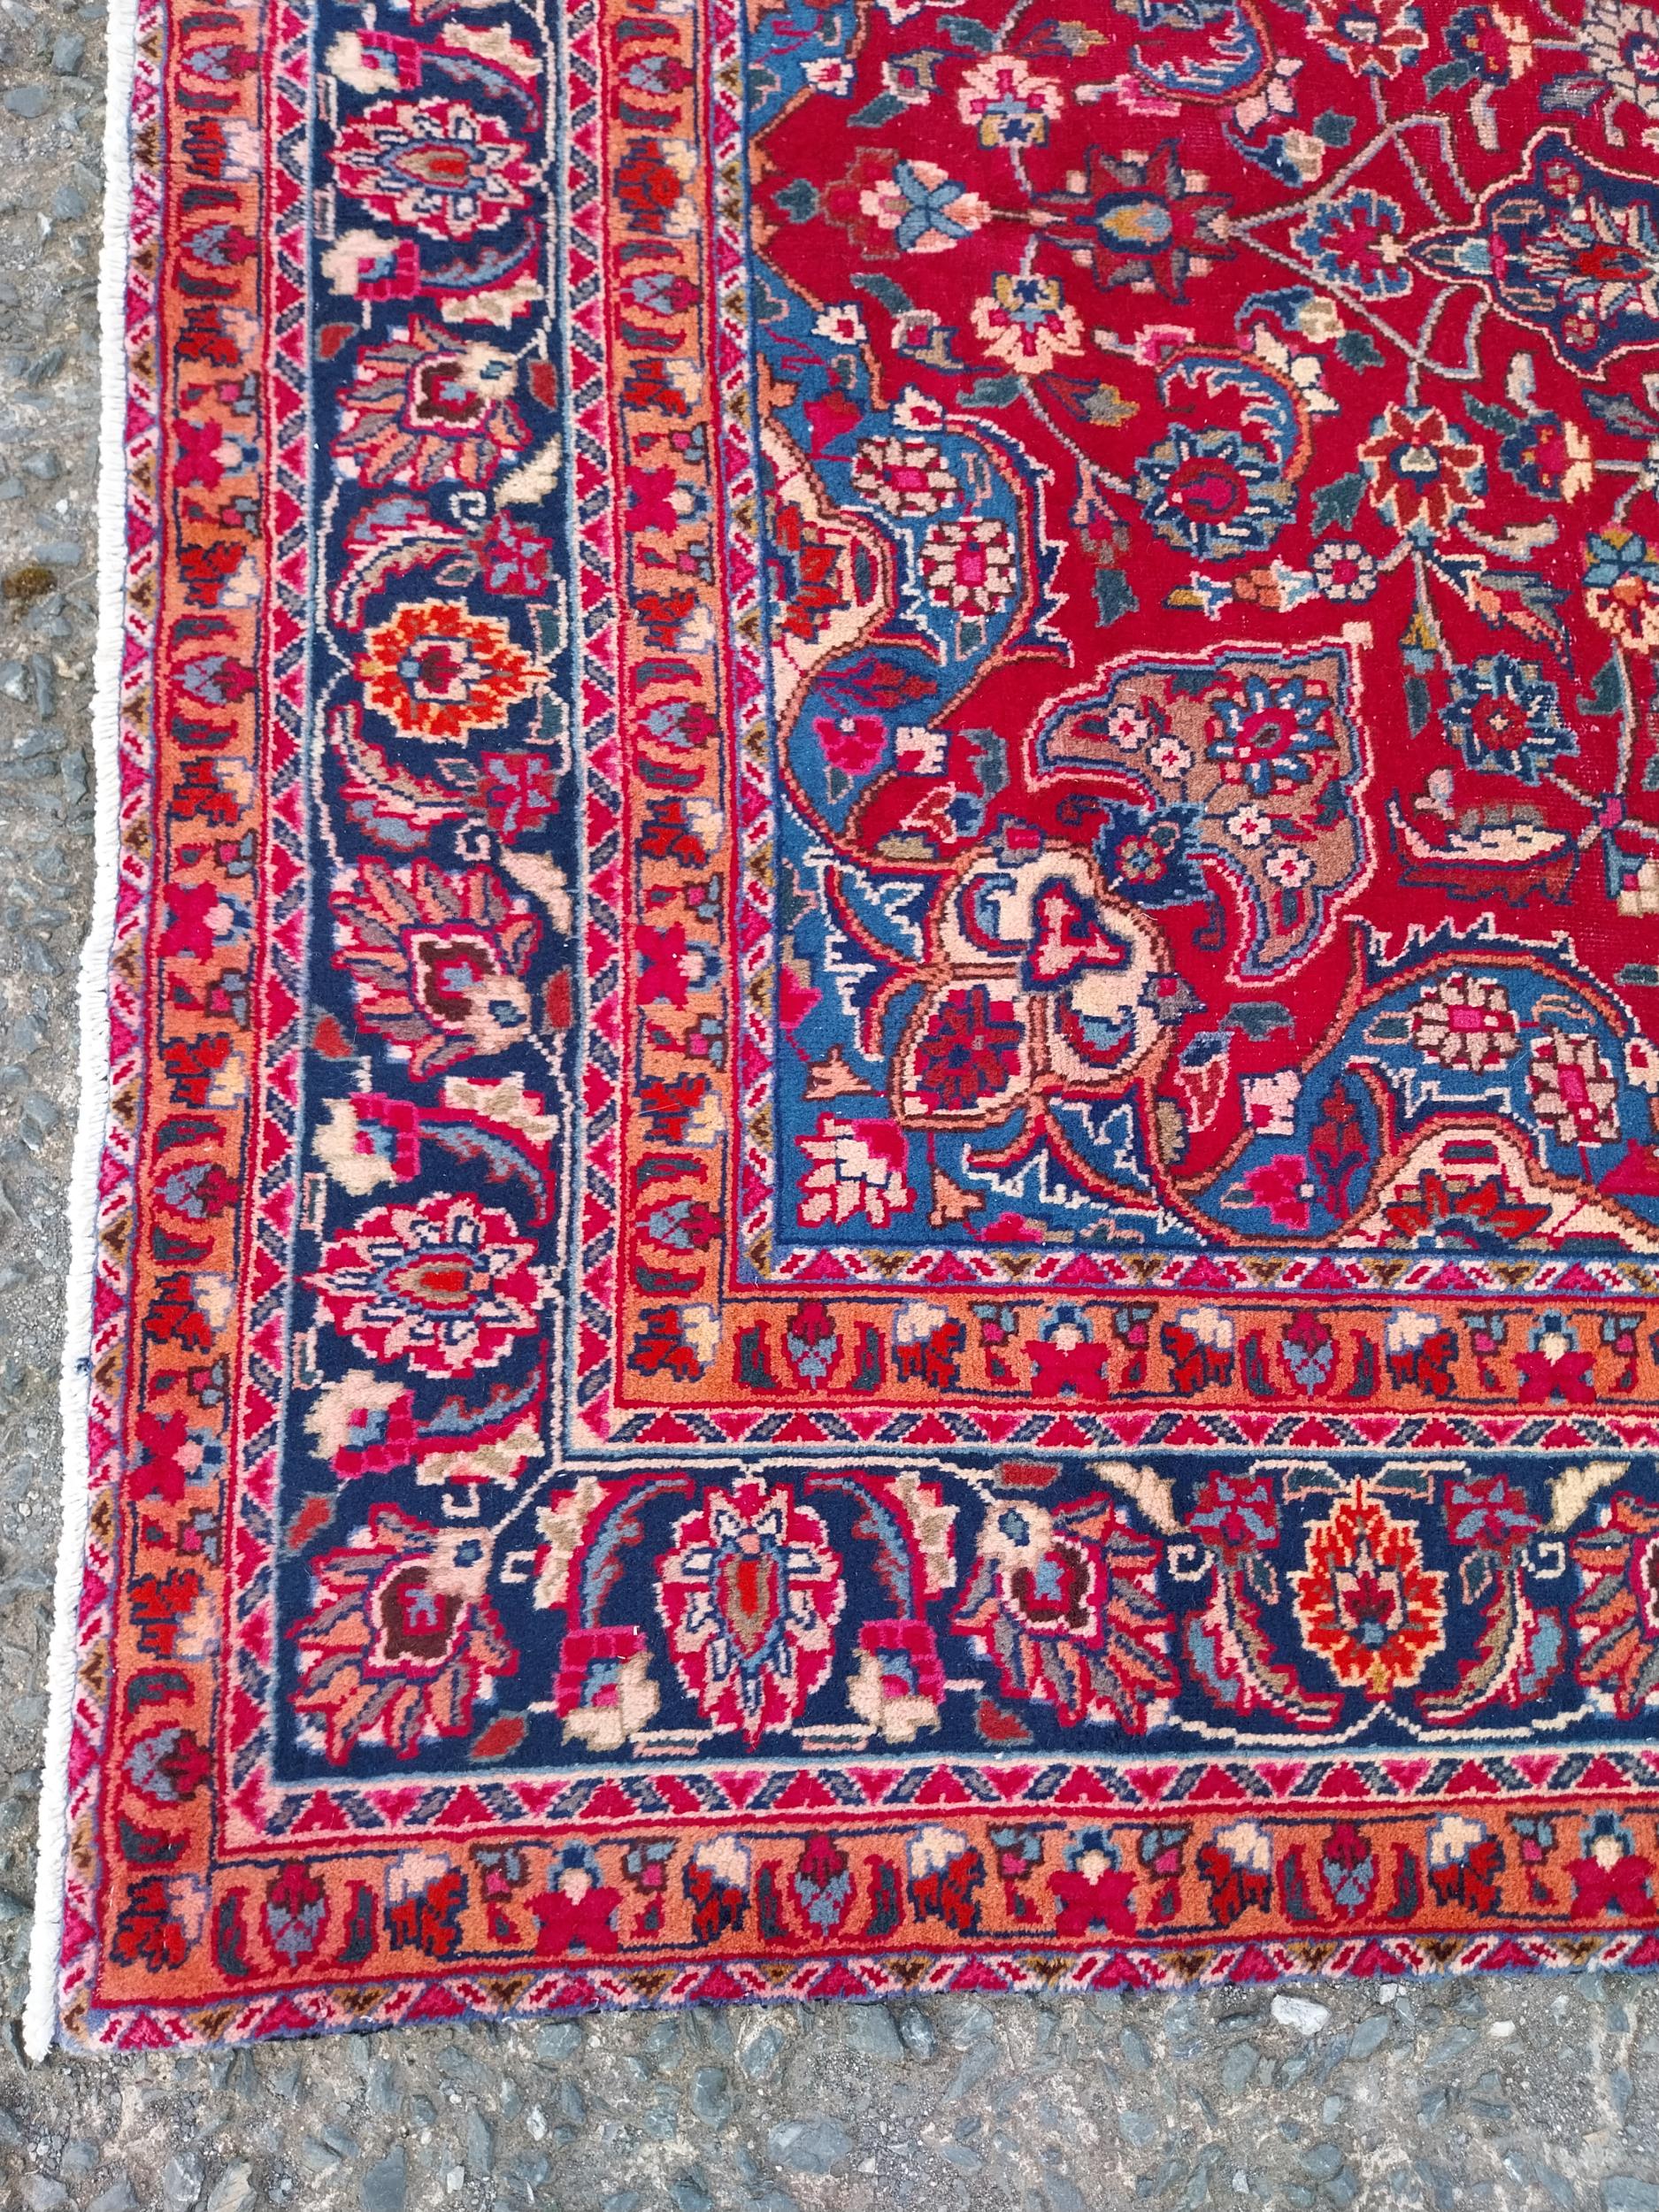 Good quality decorative Persian carpet square {300cm W x 209cm L} (not available to view in - Image 2 of 4